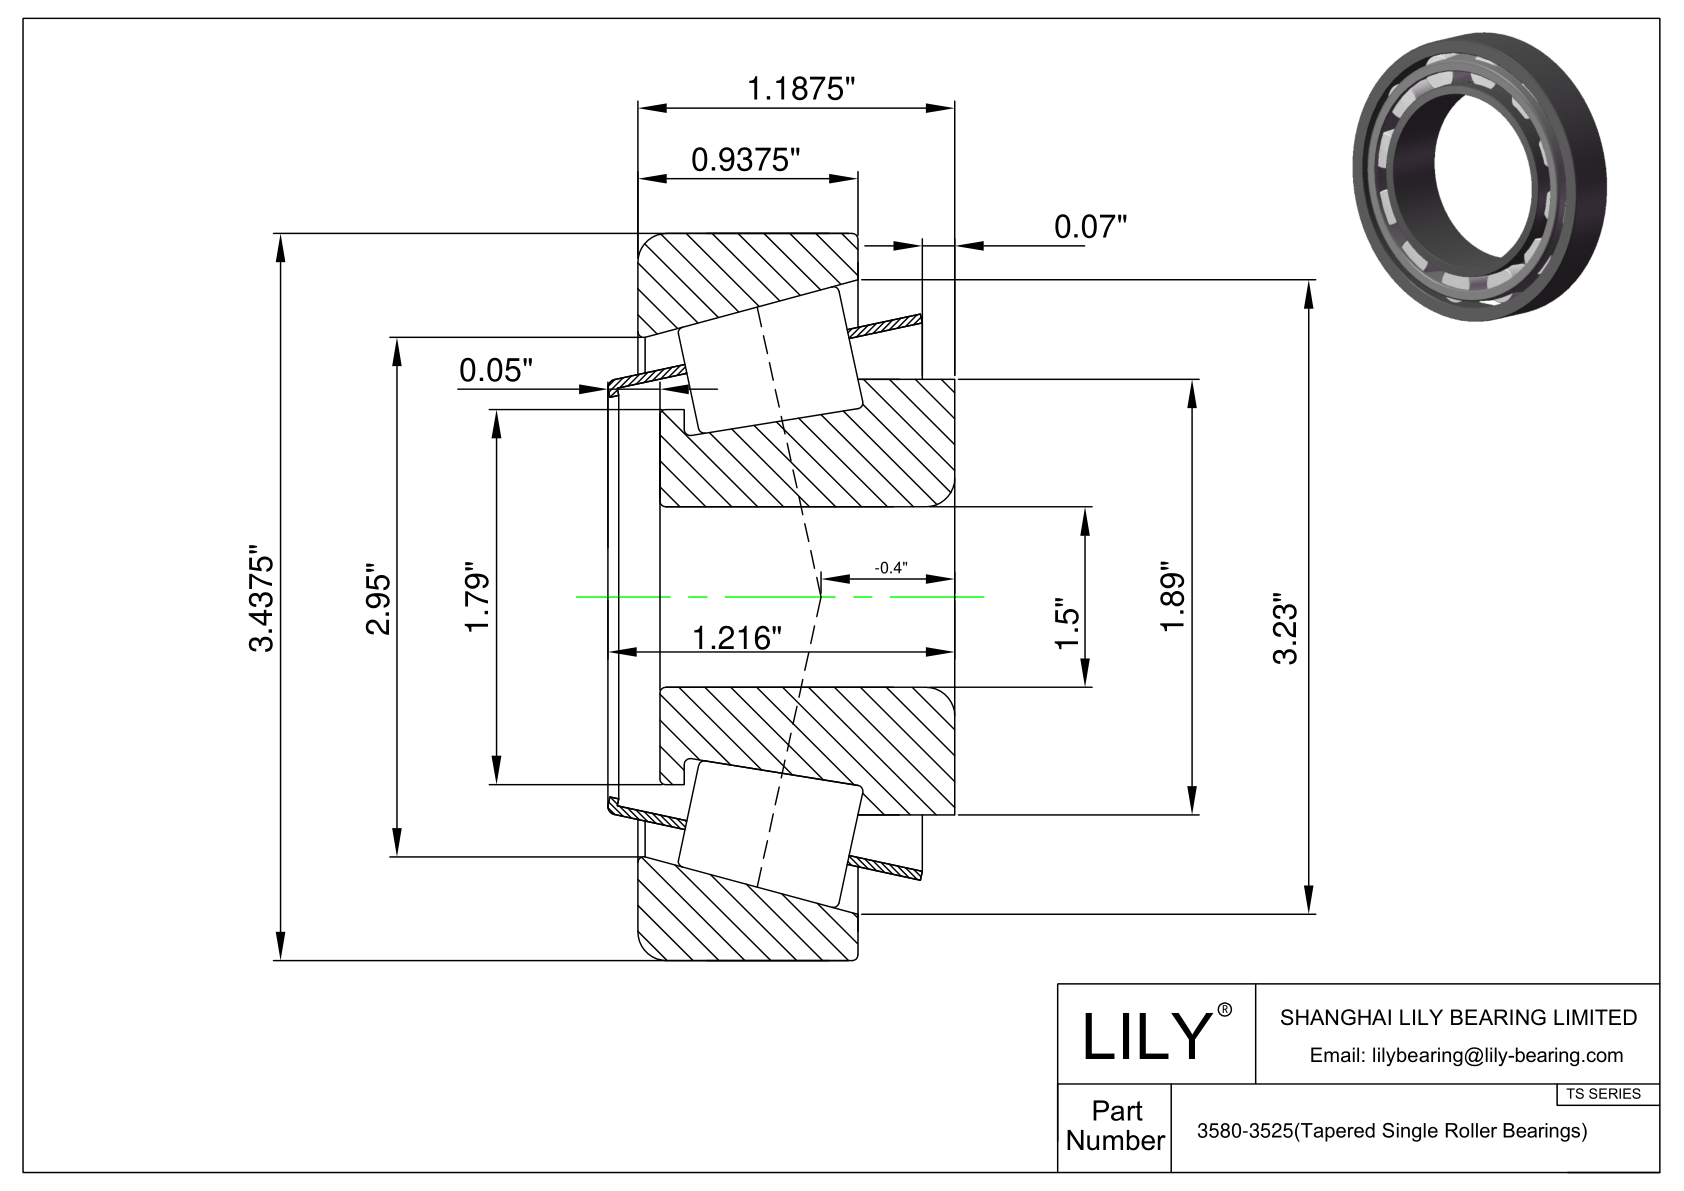 3580-3525 TS (Tapered Single Roller Bearings) (Imperial) cad drawing